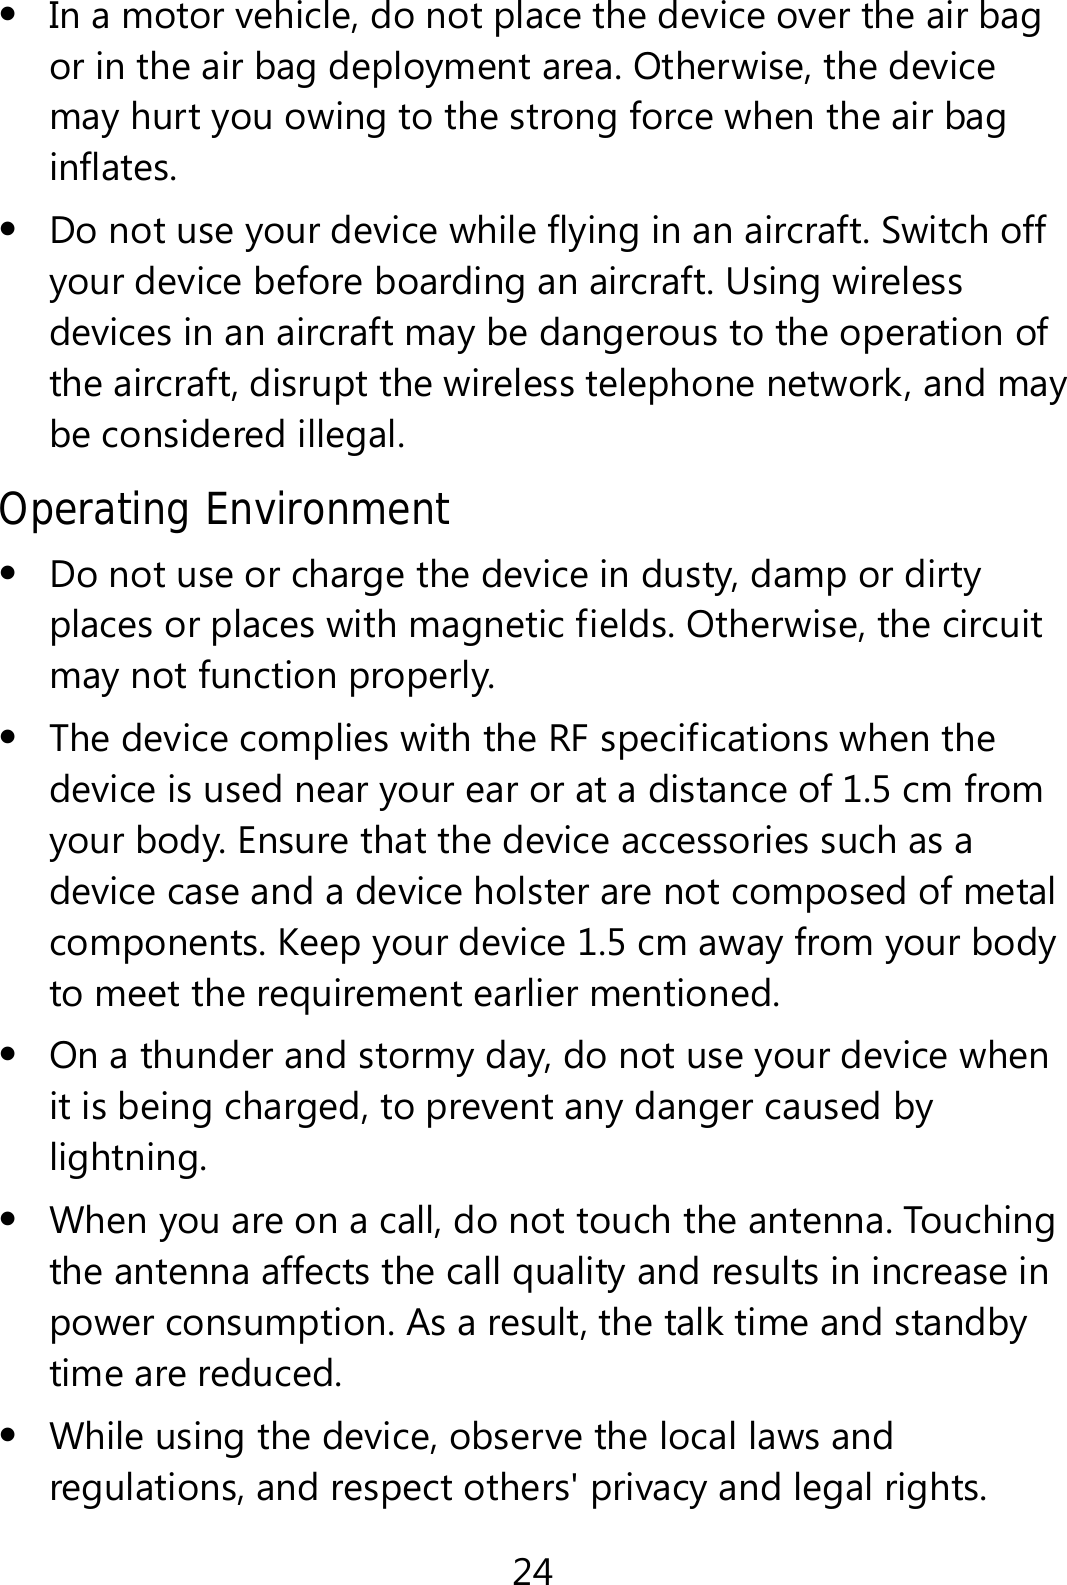 24  In a motor vehicle, do not place the device over the air bag or in the air bag deployment area. Otherwise, the device may hurt you owing to the strong force when the air bag inflates.  Do not use your device while flying in an aircraft. Switch off your device before boarding an aircraft. Using wireless devices in an aircraft may be dangerous to the operation of the aircraft, disrupt the wireless telephone network, and may be considered illegal.   Operating Environment  Do not use or charge the device in dusty, damp or dirty places or places with magnetic fields. Otherwise, the circuit may not function properly.  The device complies with the RF specifications when the device is used near your ear or at a distance of 1.5 cm from your body. Ensure that the device accessories such as a device case and a device holster are not composed of metal components. Keep your device 1.5 cm away from your body to meet the requirement earlier mentioned.  On a thunder and stormy day, do not use your device when it is being charged, to prevent any danger caused by lightning.  When you are on a call, do not touch the antenna. Touching the antenna affects the call quality and results in increase in power consumption. As a result, the talk time and standby time are reduced.  While using the device, observe the local laws and regulations, and respect others&apos; privacy and legal rights. 